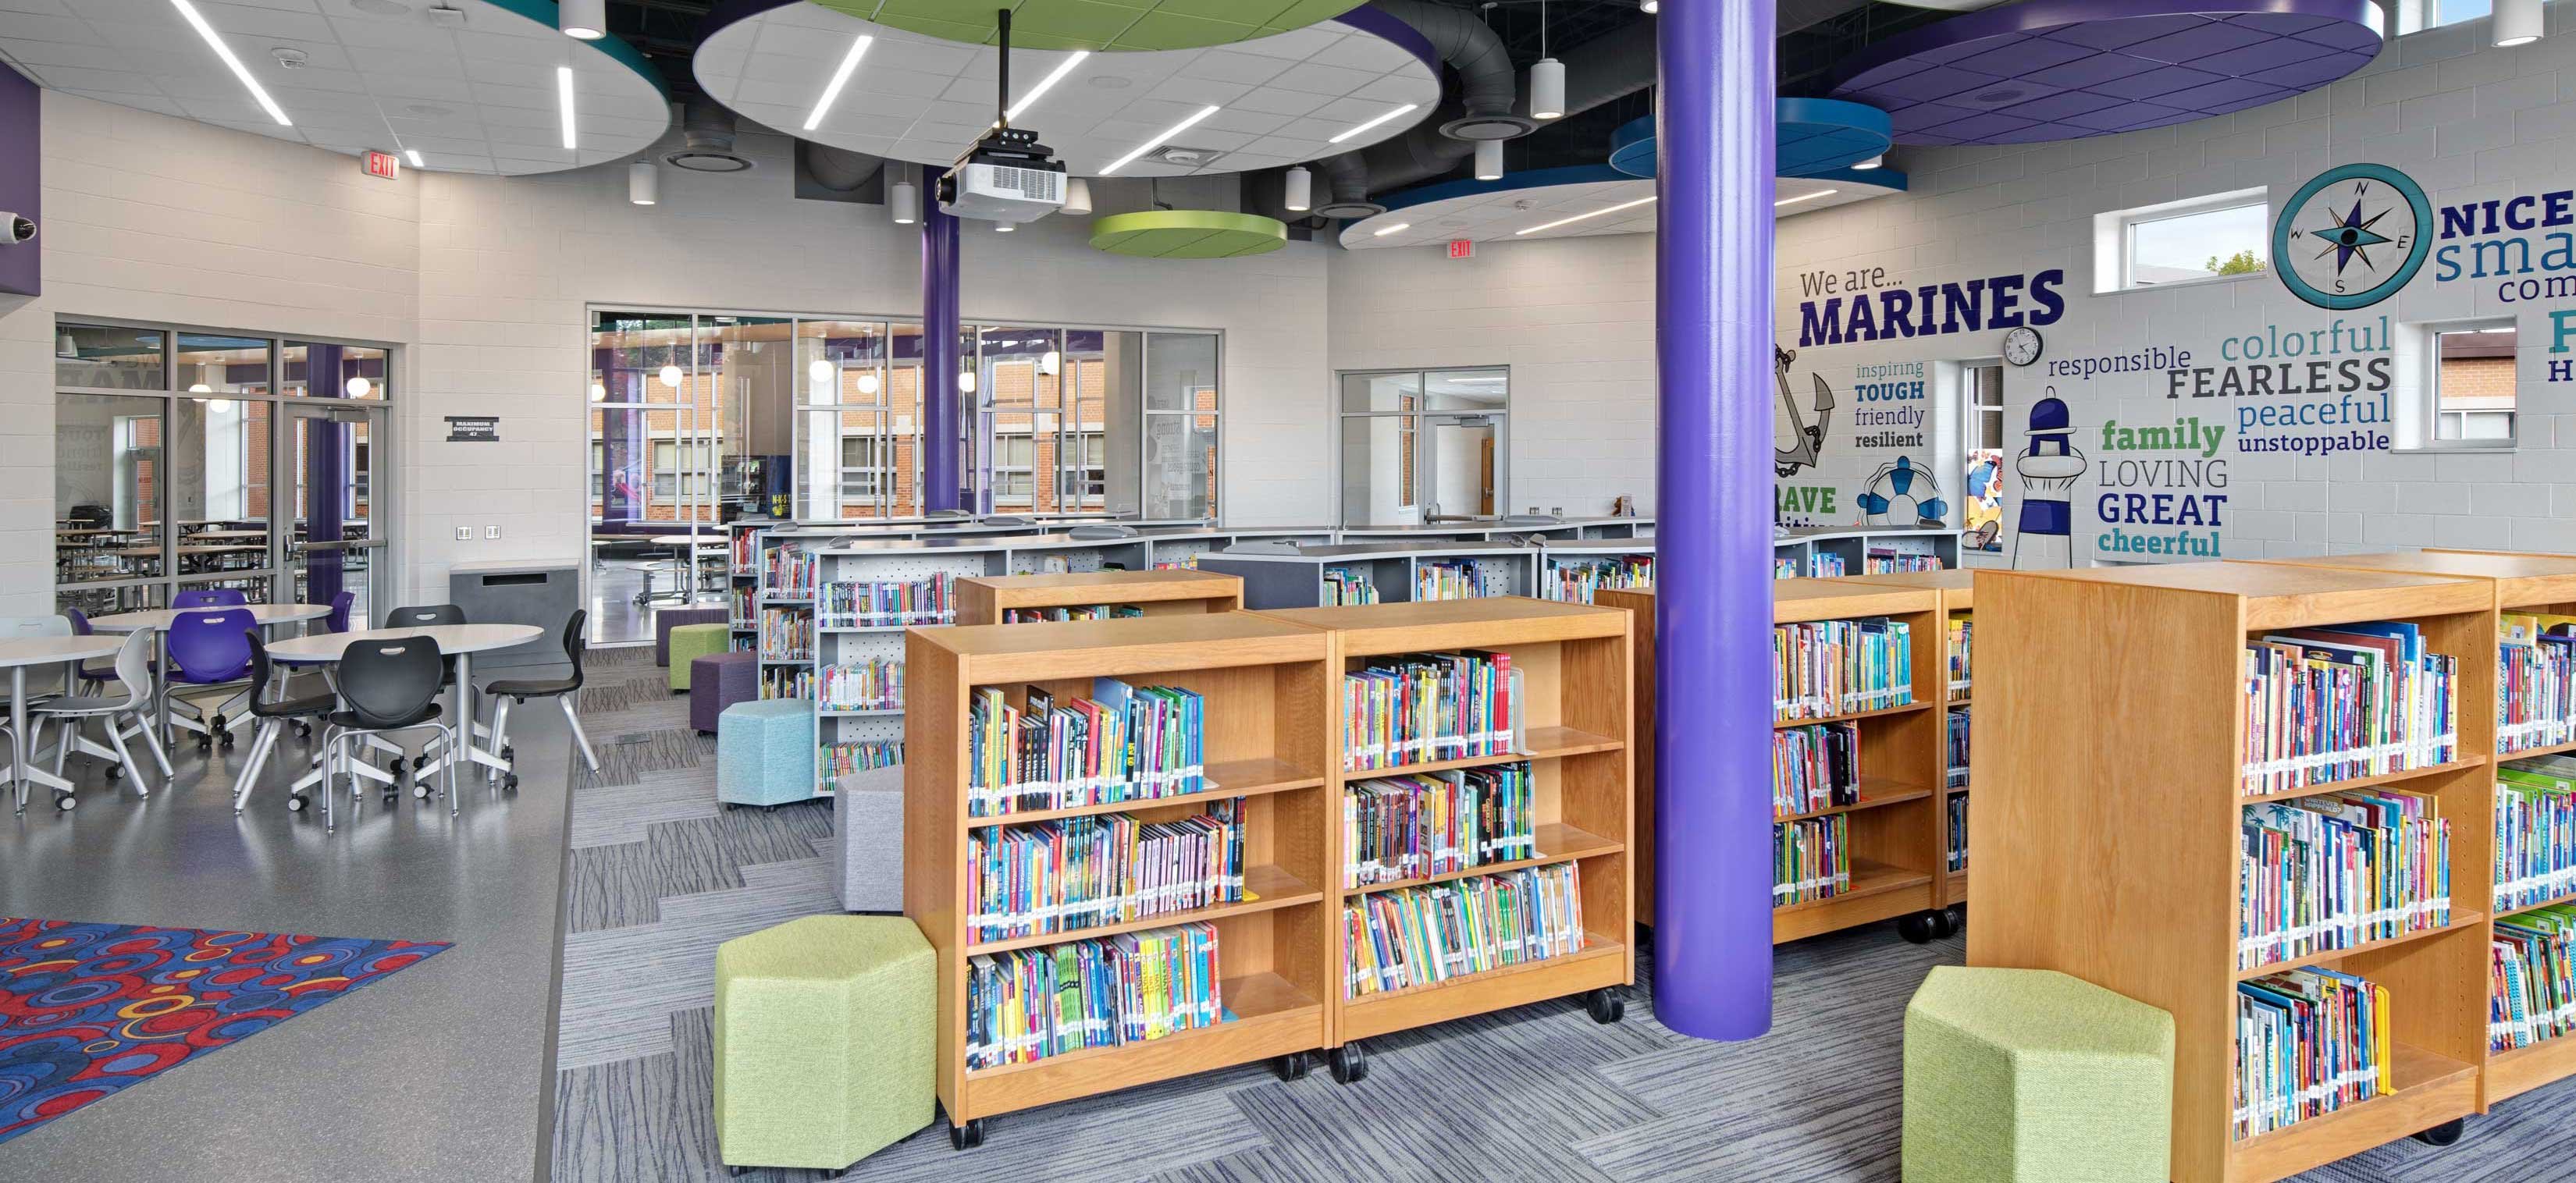 Modern School Building C.D. Smith Construction Manager & Preconstruction Marinette Intermediate School Addition Renovation Project library